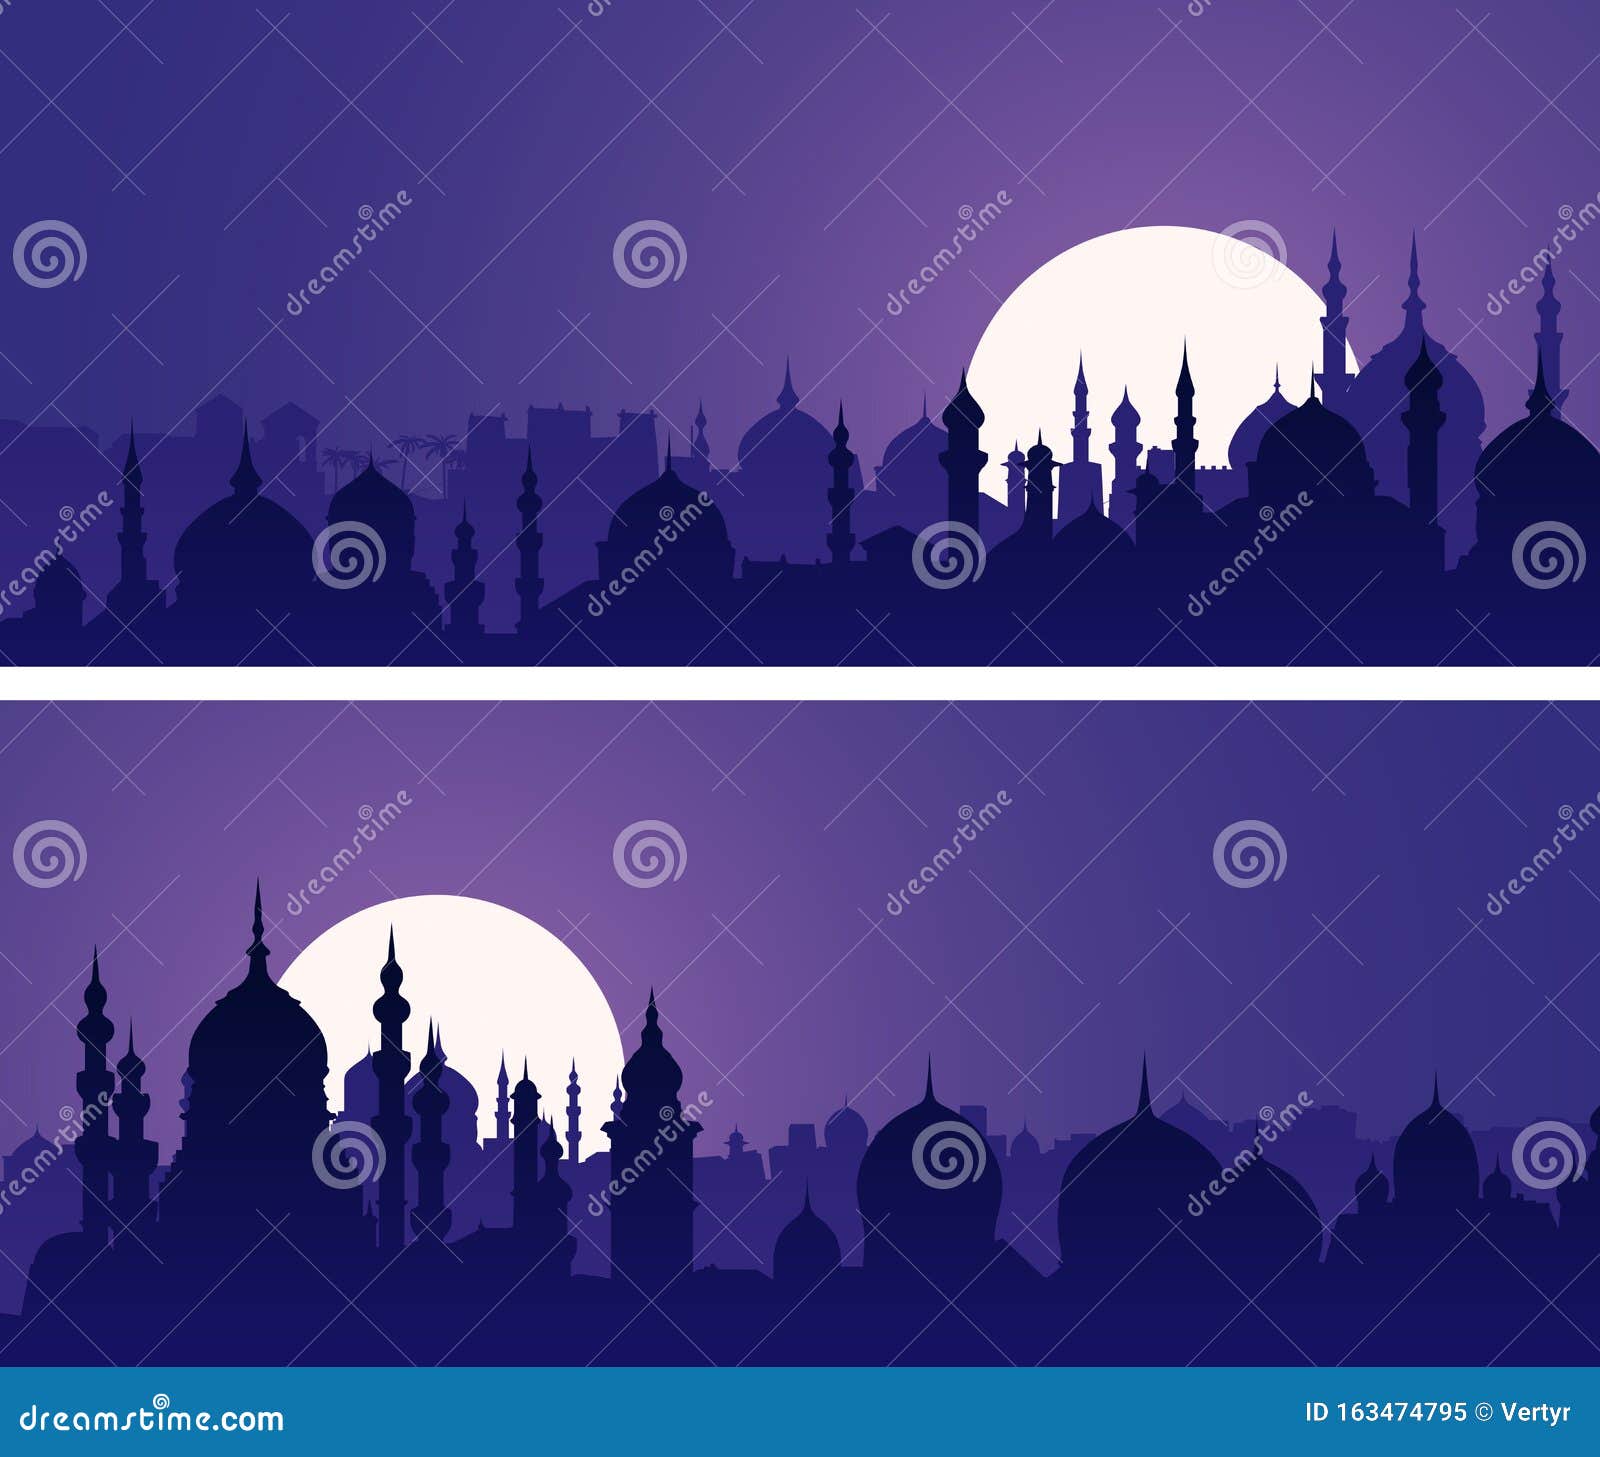 horizontal banners of eastern city with minarets and domes at night.